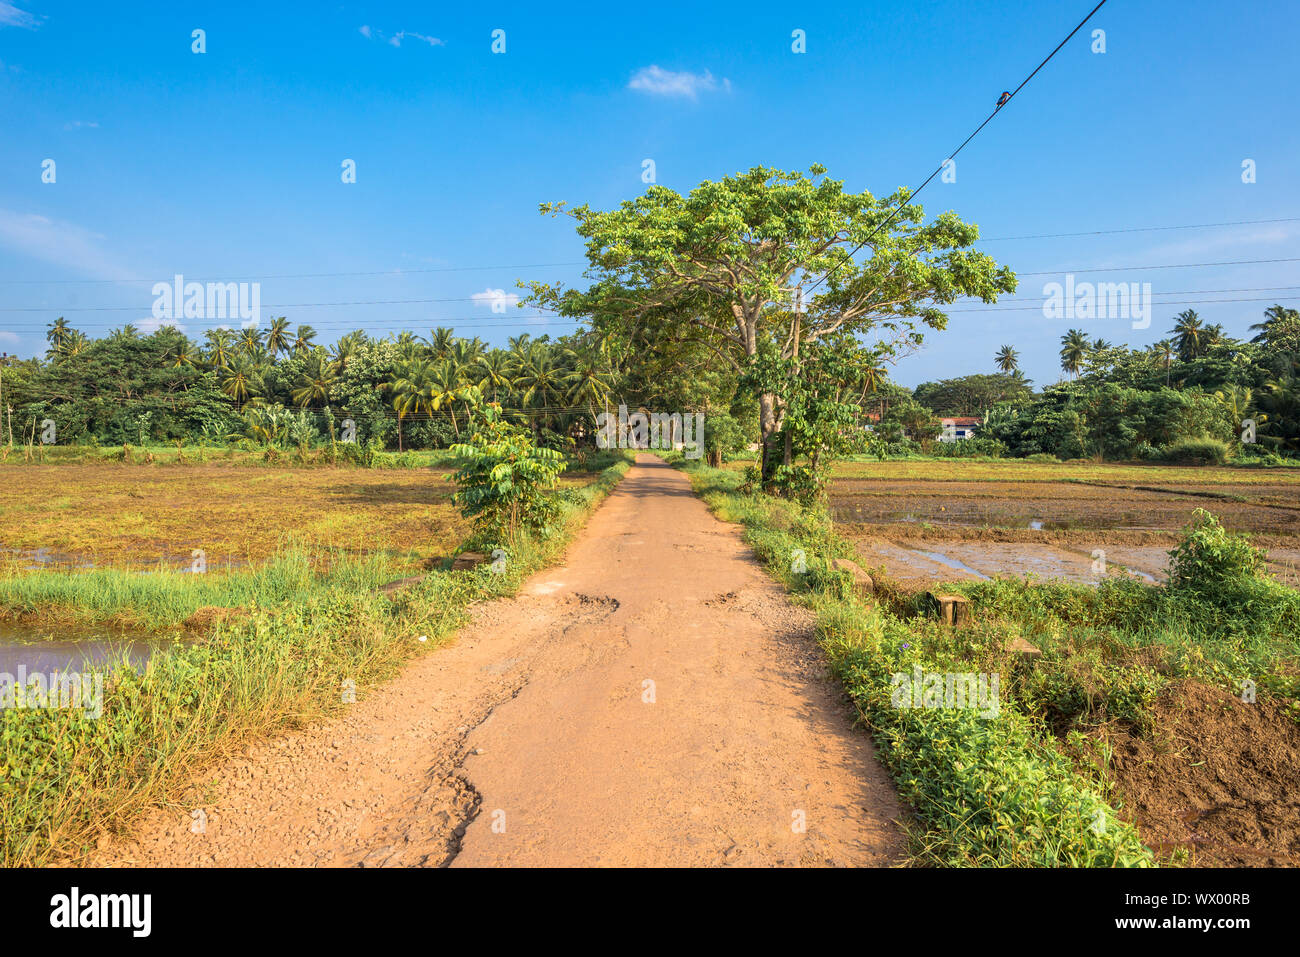 Paddy fields in the countryside in the southern province of Sri Lanka Stock Photo